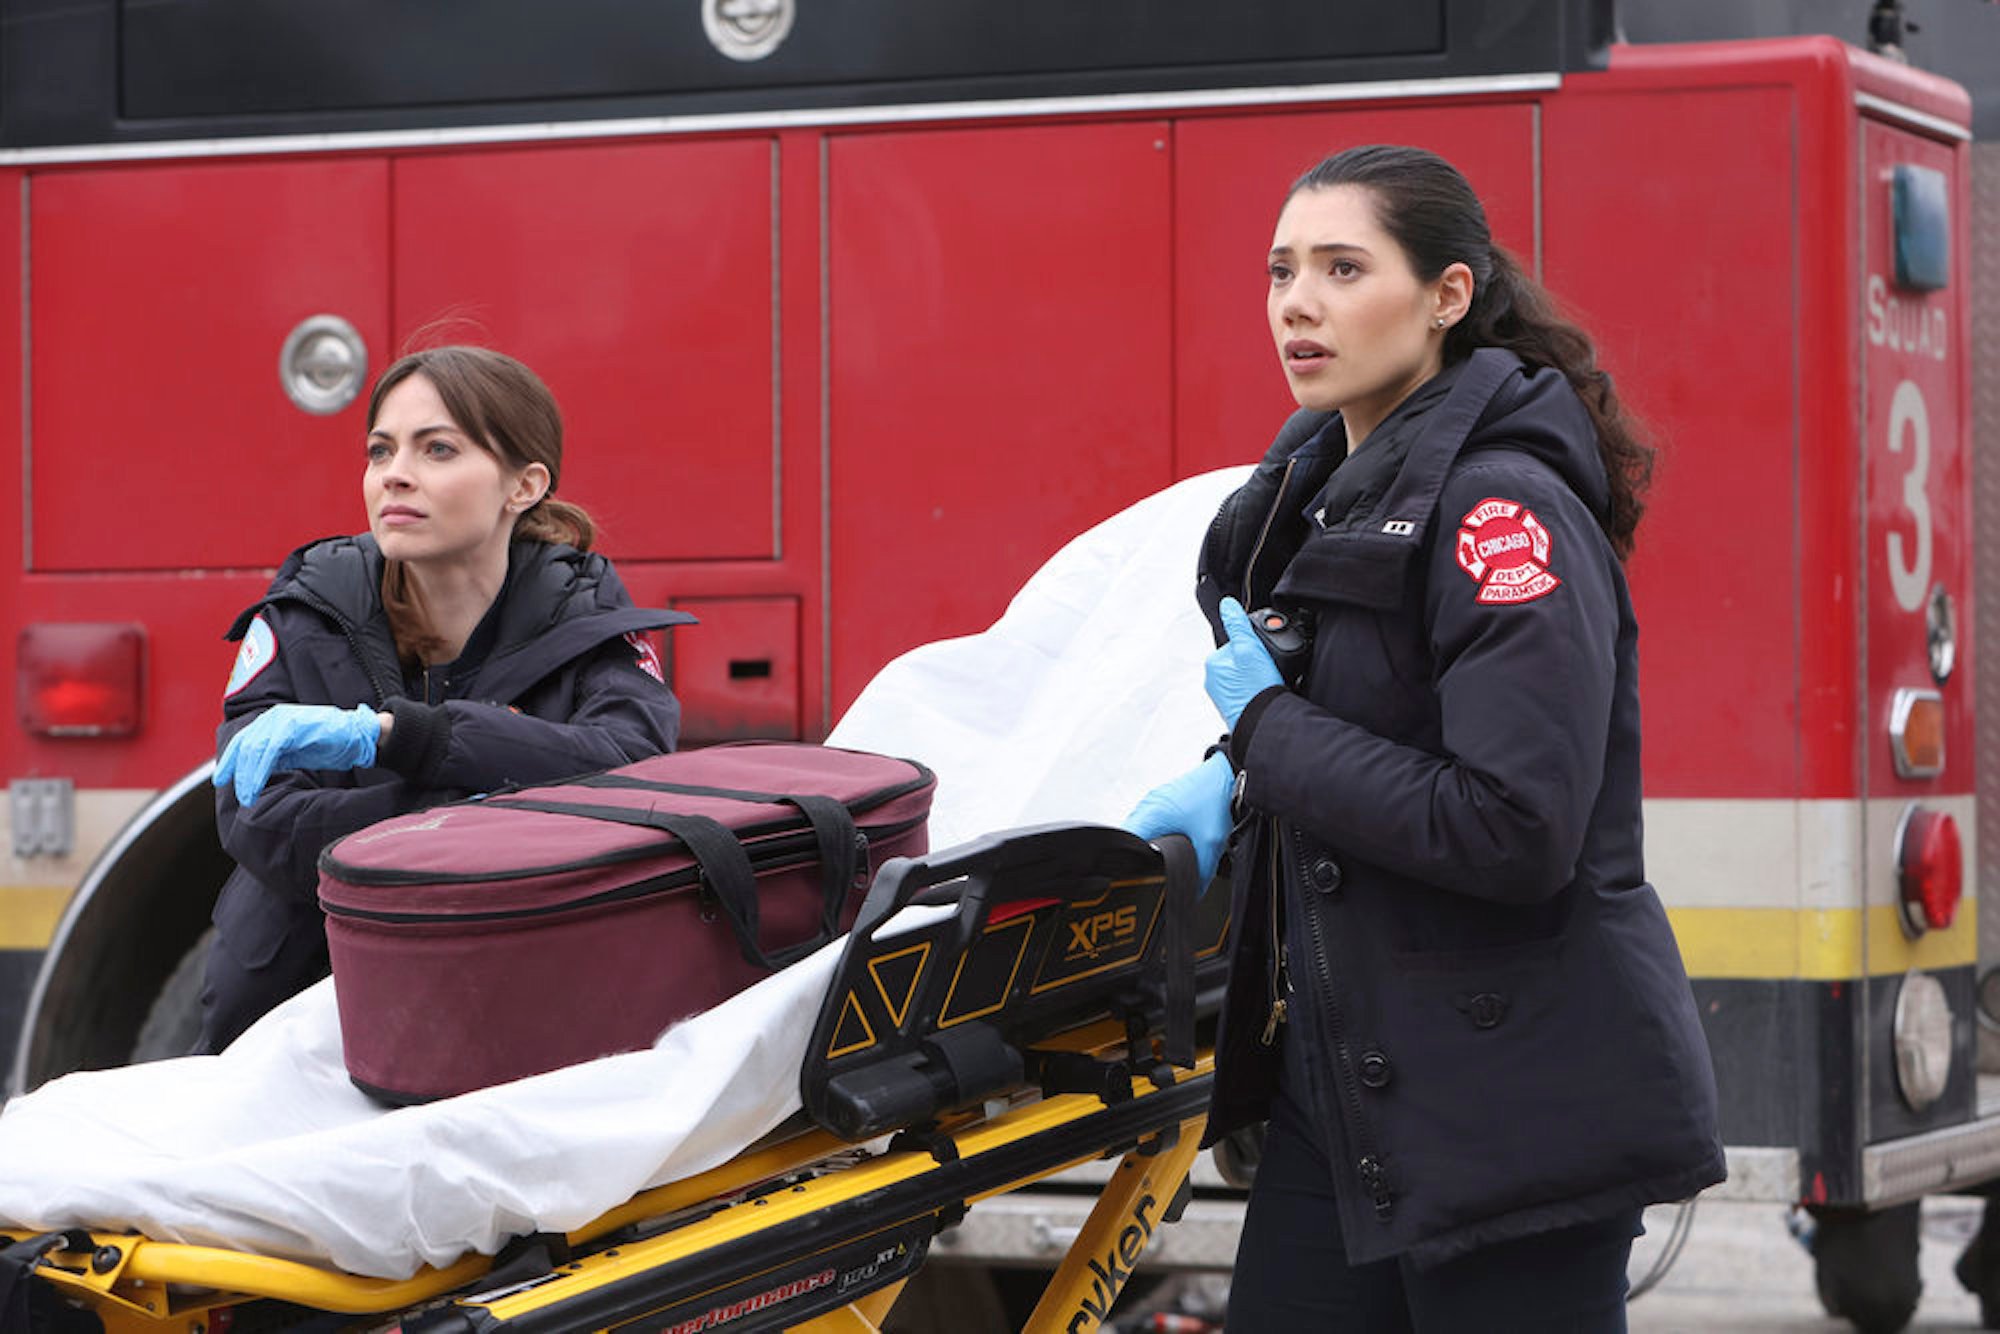 Emma Jacobs and Violet Mikami next to a stretcher in 'Chicago Fire' Season 10 Episode 20